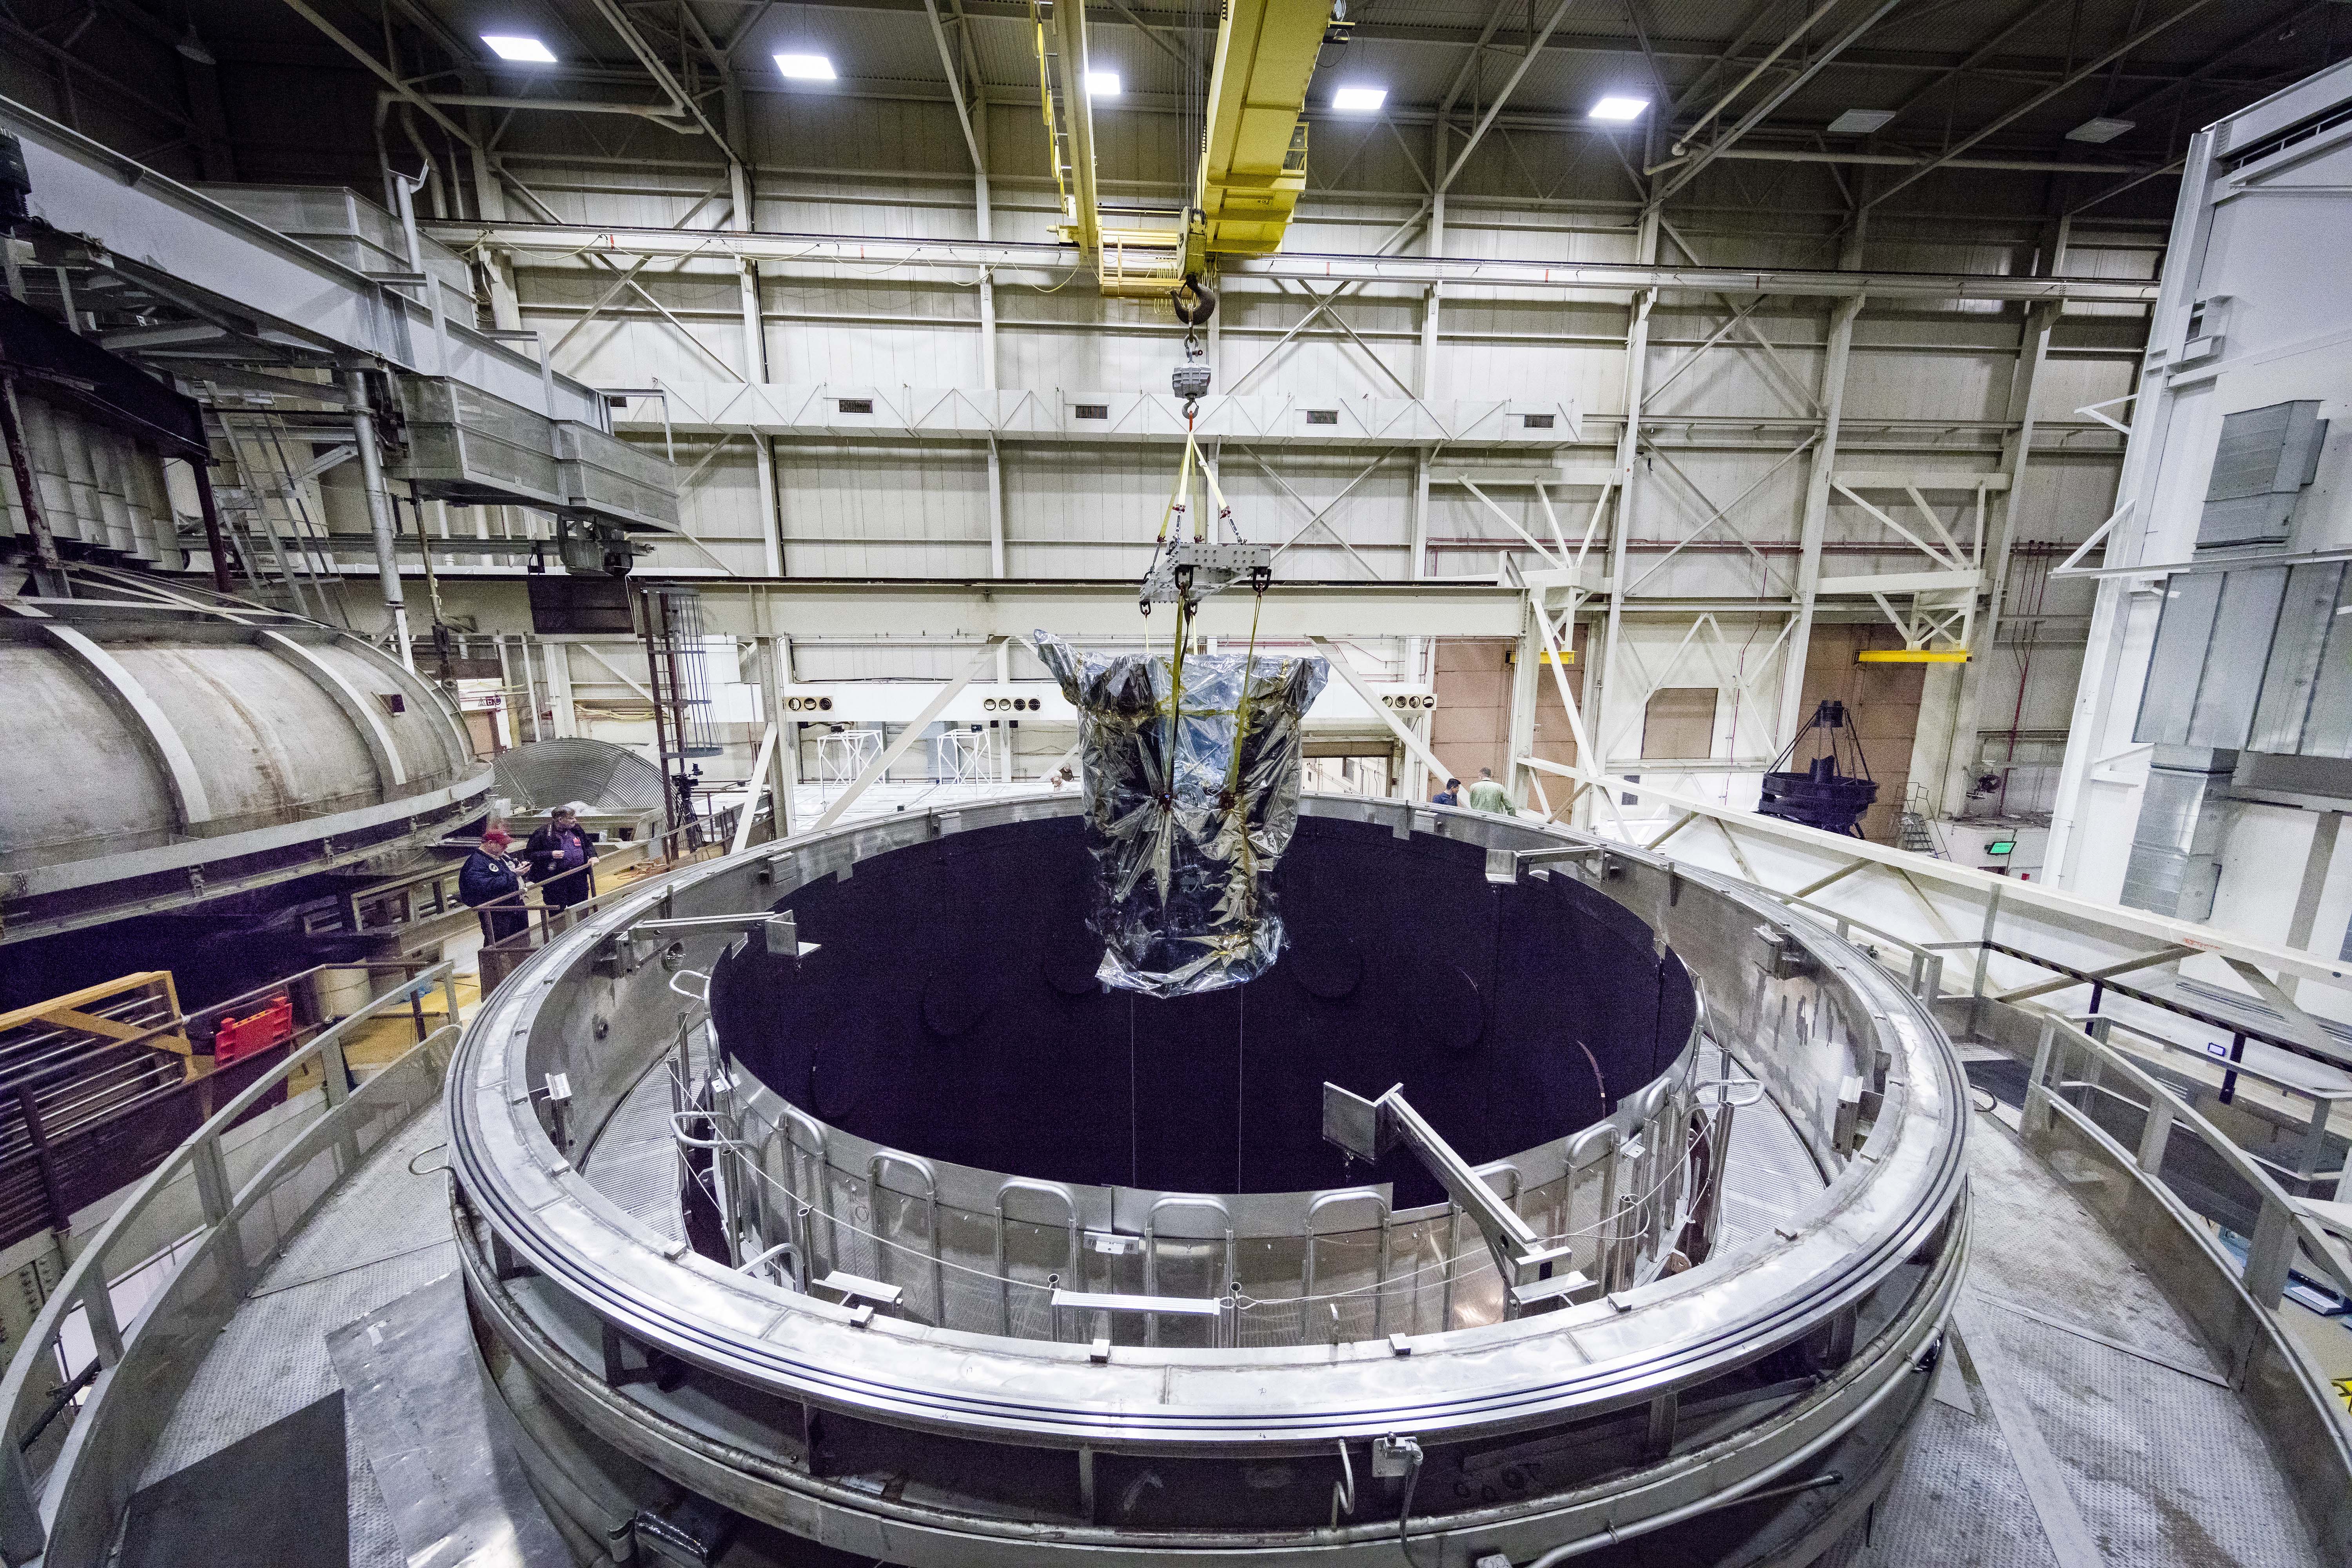 Parker Solar Probe is lifted out of the Space Environment Simulator at NASA’s Goddard Space Flight Center in Greenbelt, Maryland, on March 24, 2018. The spacecraft has spent eight weeks undergoing space environment testing in the thermal vacuum chamber. After about seven more days of testing outside the chamber, Parker Solar Probe will travel to Florida for a scheduled launch on July 31, 2018, from NASA’s Kennedy Space Center in Cape Canaveral. 